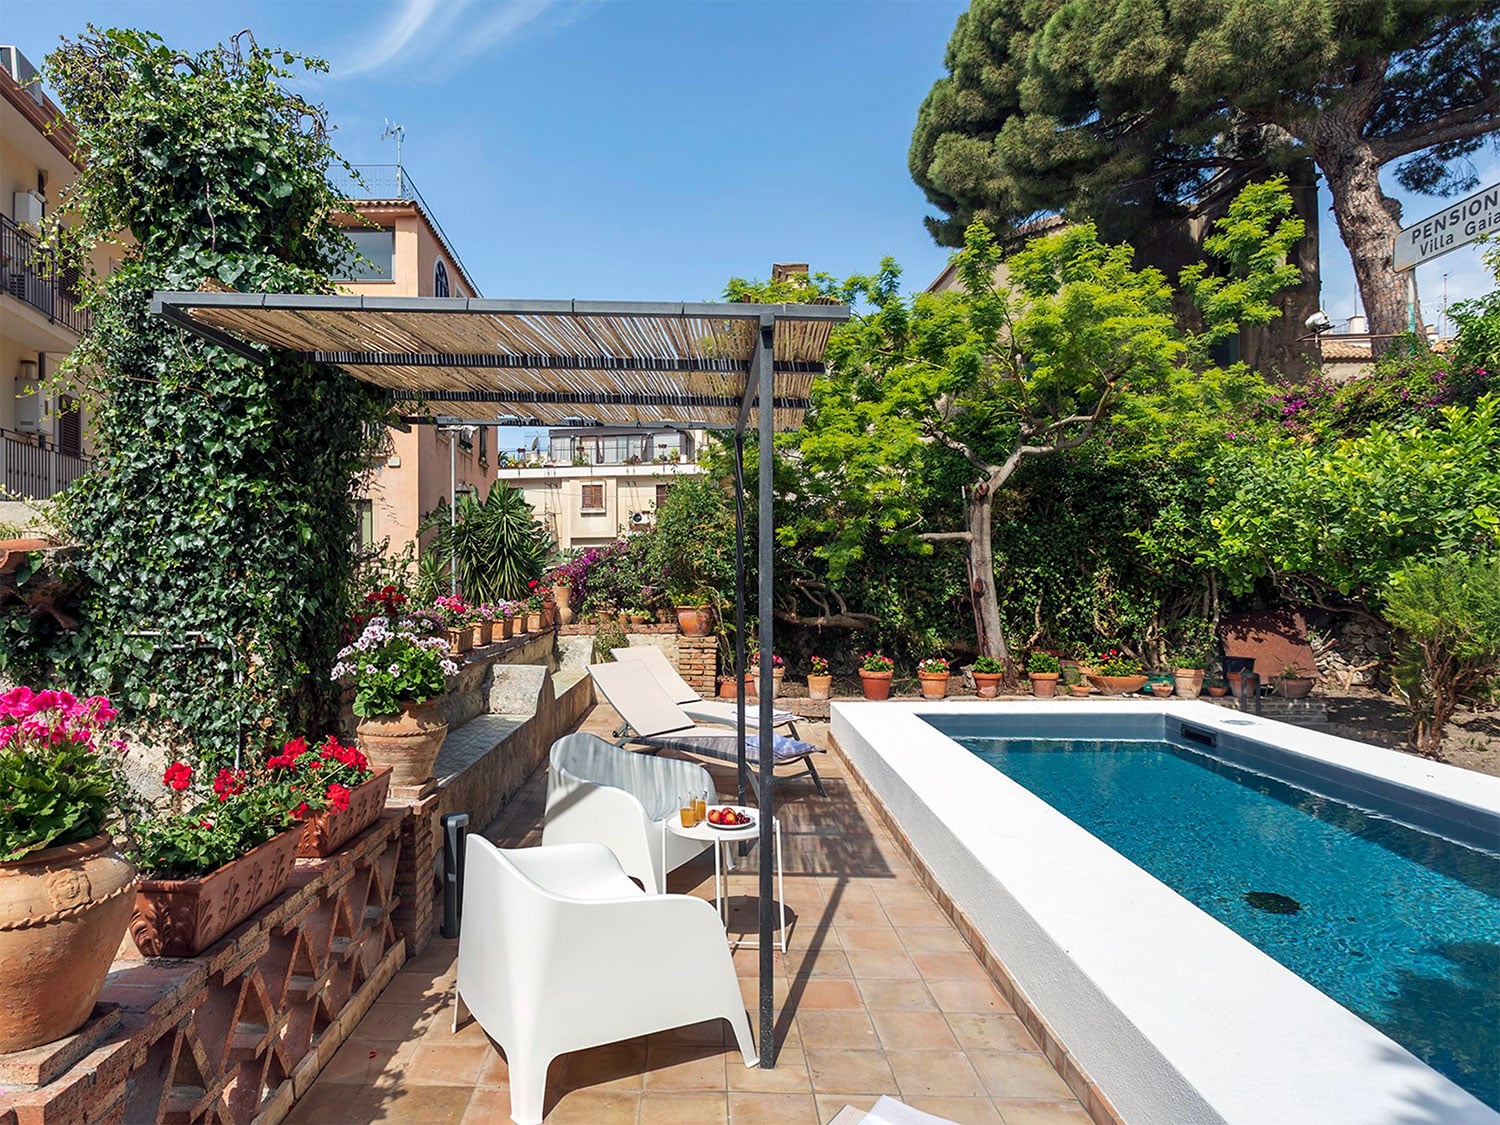 The pool and outdoor space at the three-bedroom Villa Carmine in Taormina, Sicily, Italy.